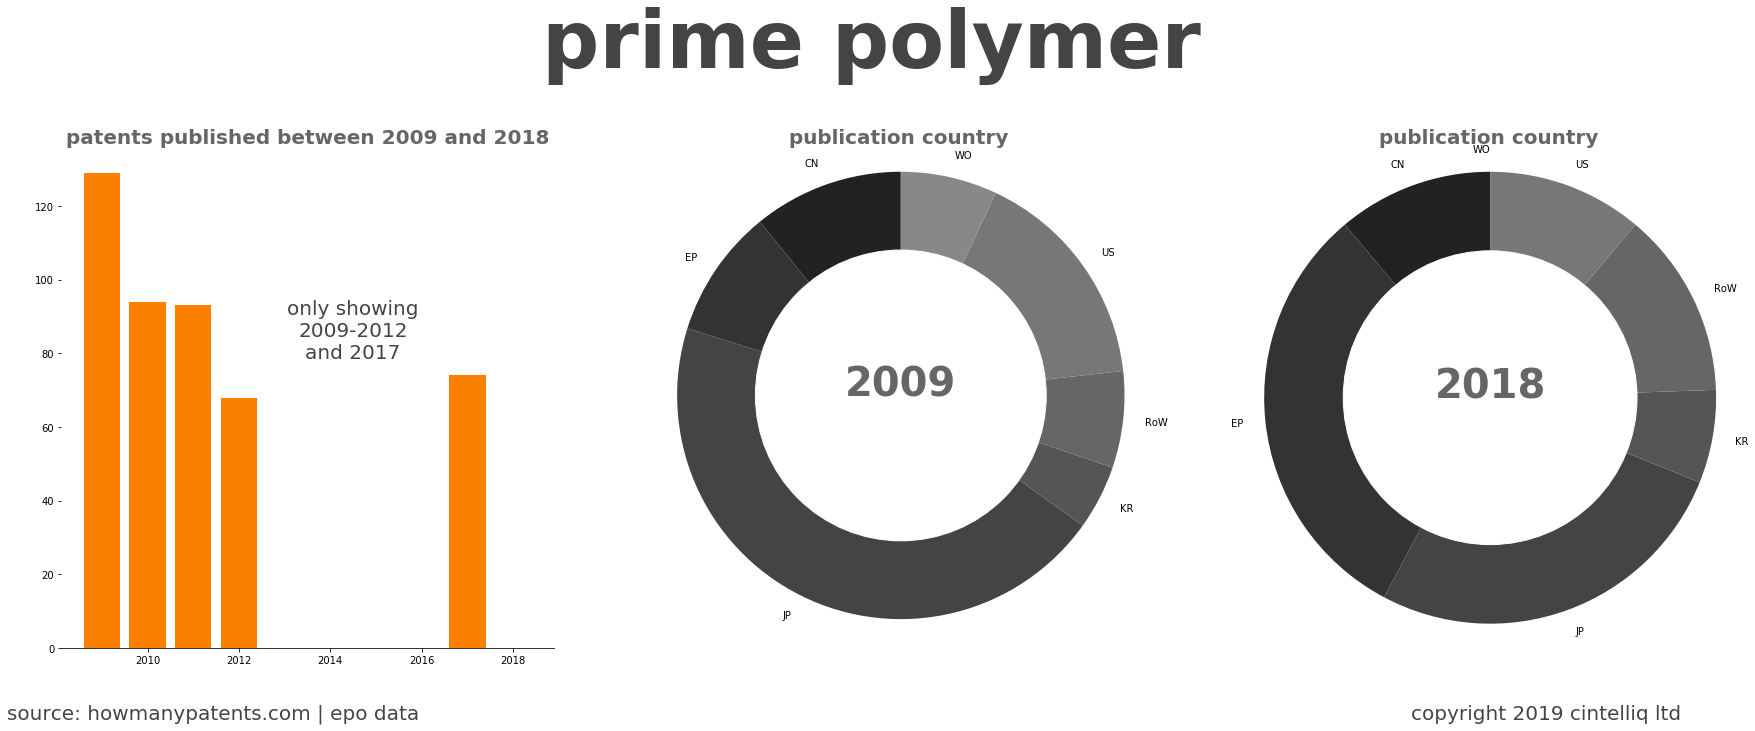 summary of patents for Prime Polymer